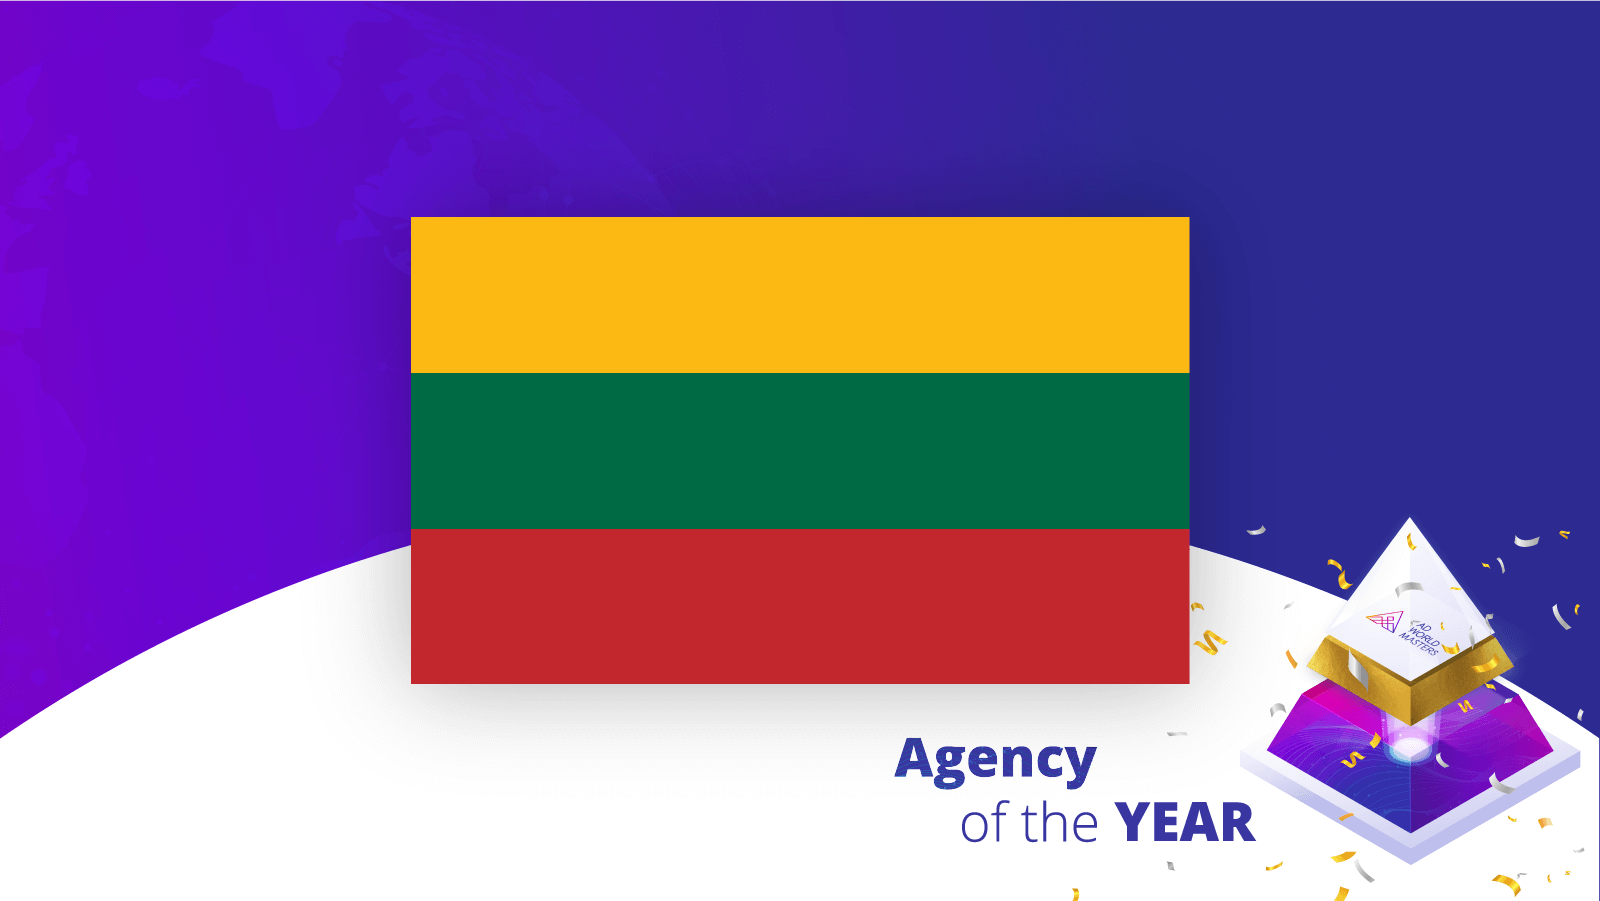 Agencies of the World Lithuania